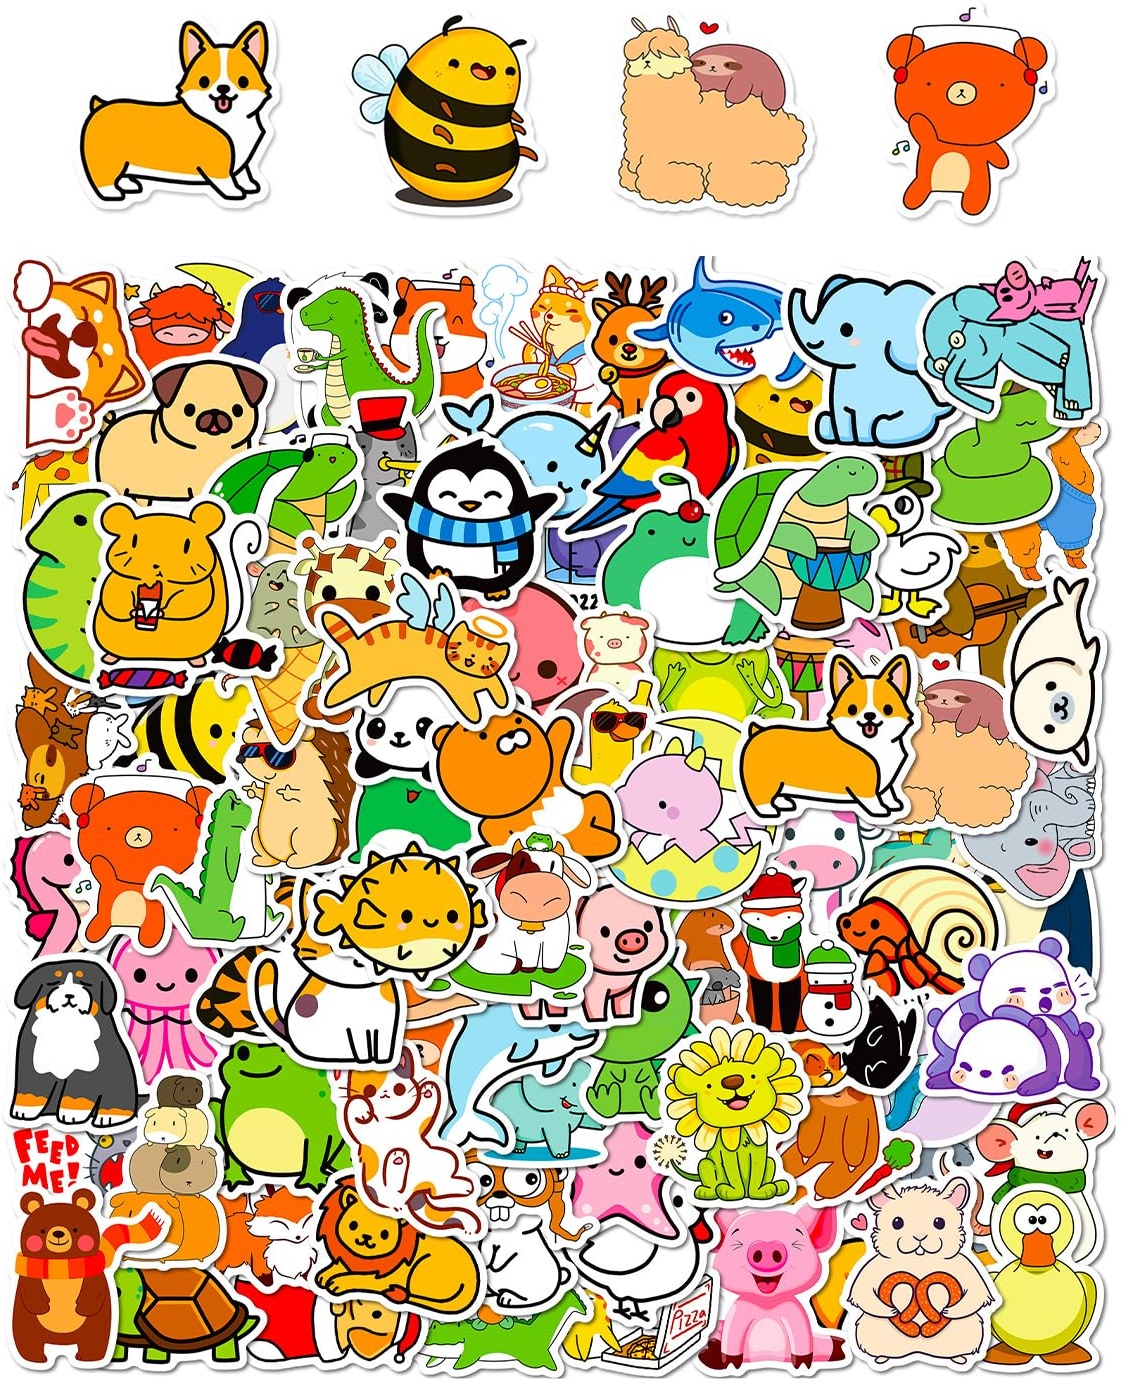 NyxSeat 100 Pieces of Children’s Stickers, Cute Animal Stickers, Waterproof Animal Cartoon Pattern Sticker Set, Notebook, Water Cup, Luggage Decoration, Mobile Phone, Refrigerator Decoration